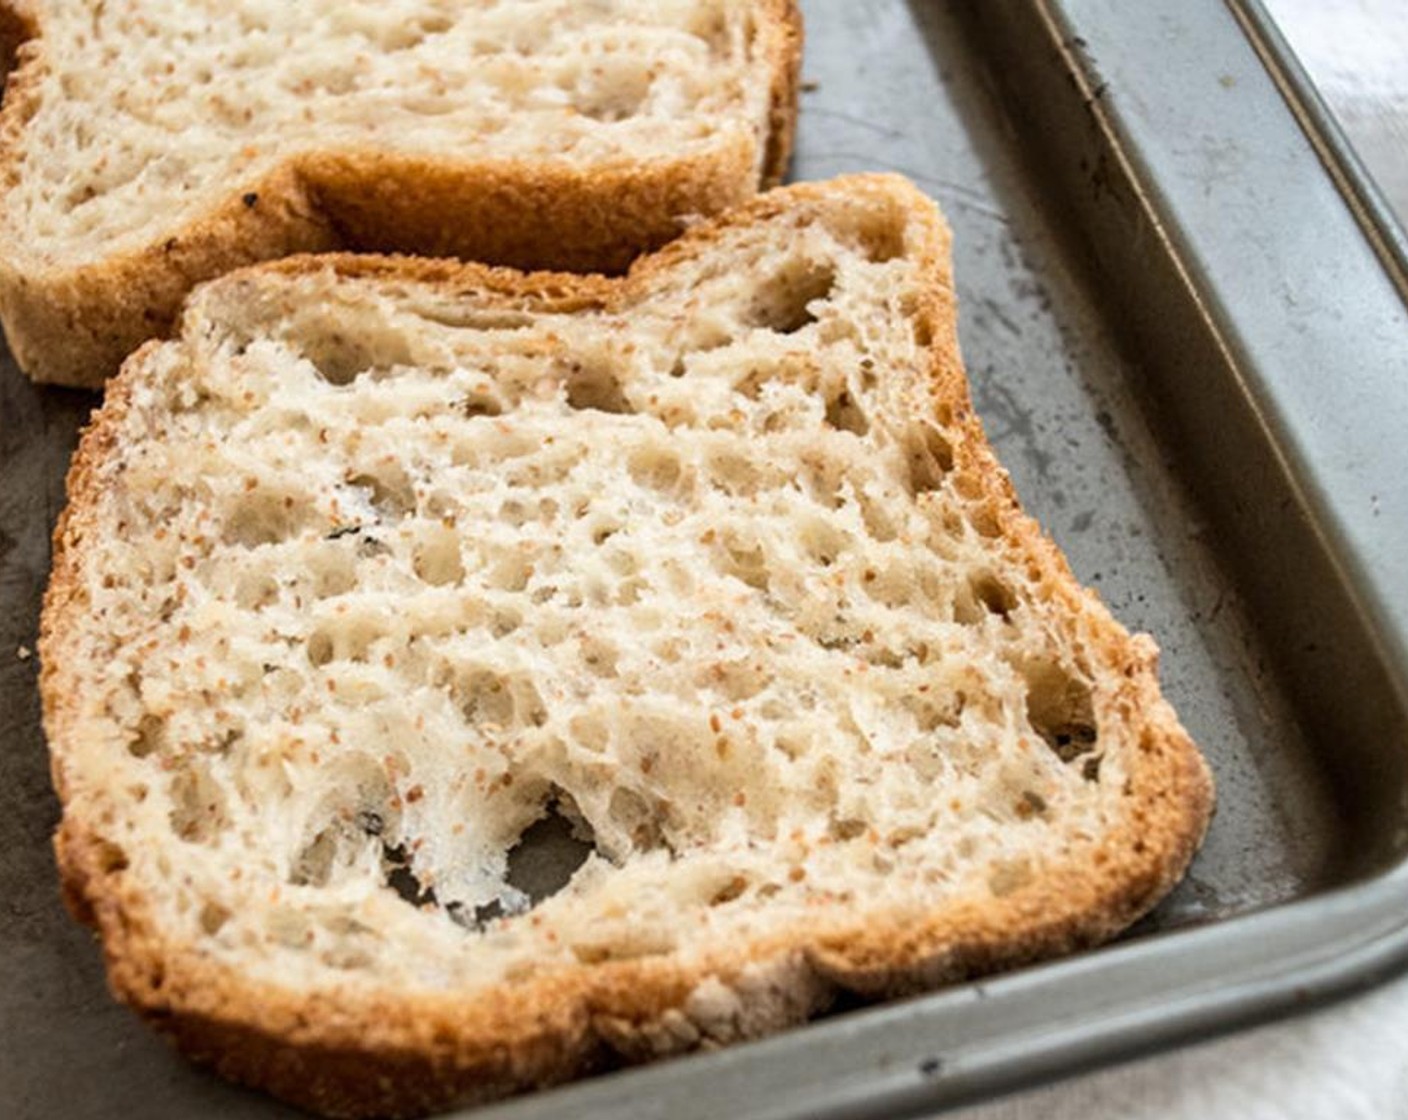 step 2 To create breadcrumbs, add Gluten-Free Bread (3 slices) to baking sheet and bake for approximately 10 minutes or until well toasted, remove and allow to cool completely.